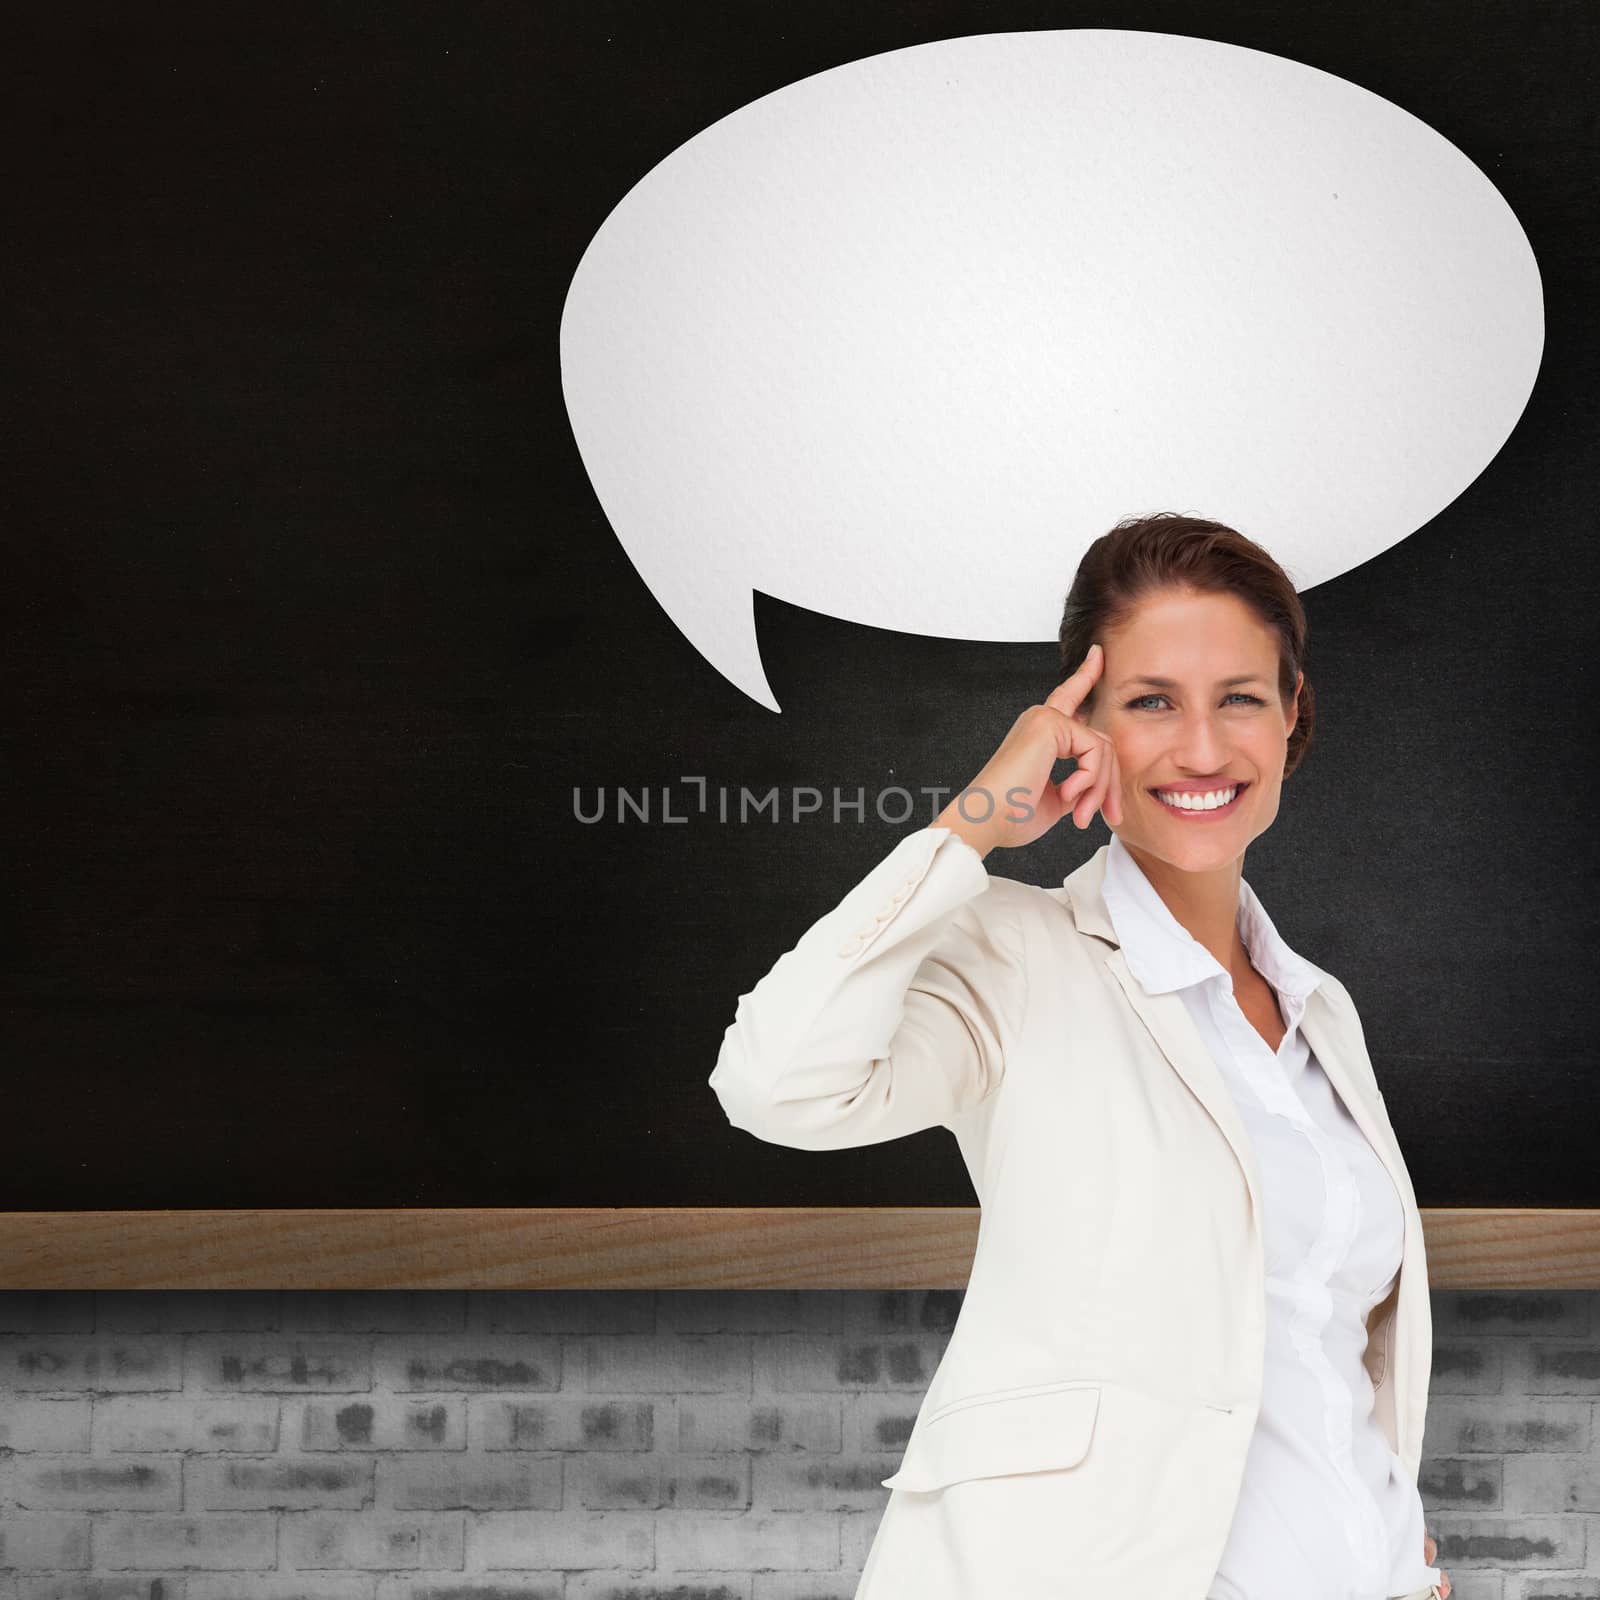 Thinking businesswoman with speech bubble against blackboard on wall